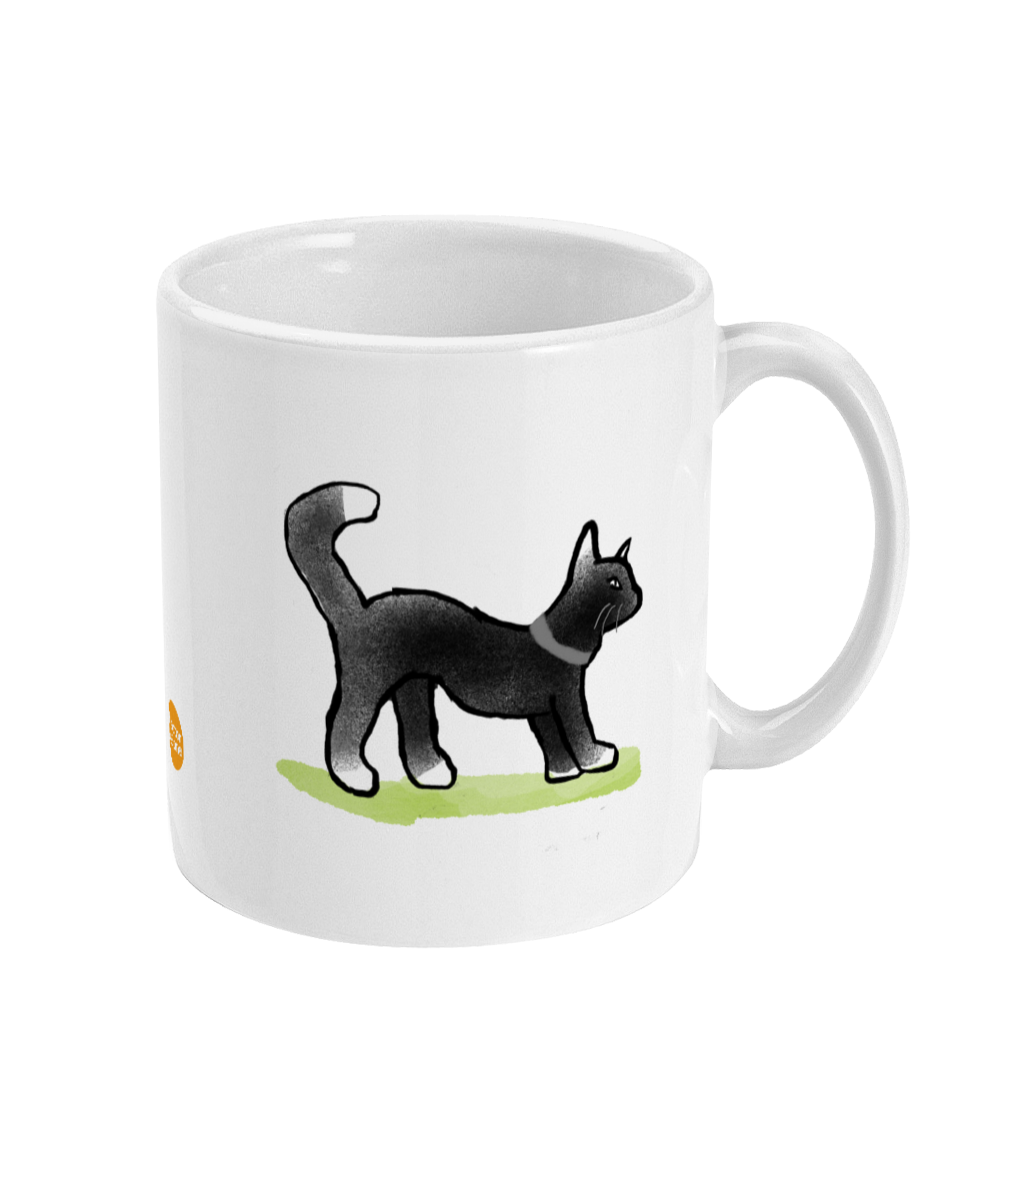 Black Cat coffee mug design by Hector and Bone Right View